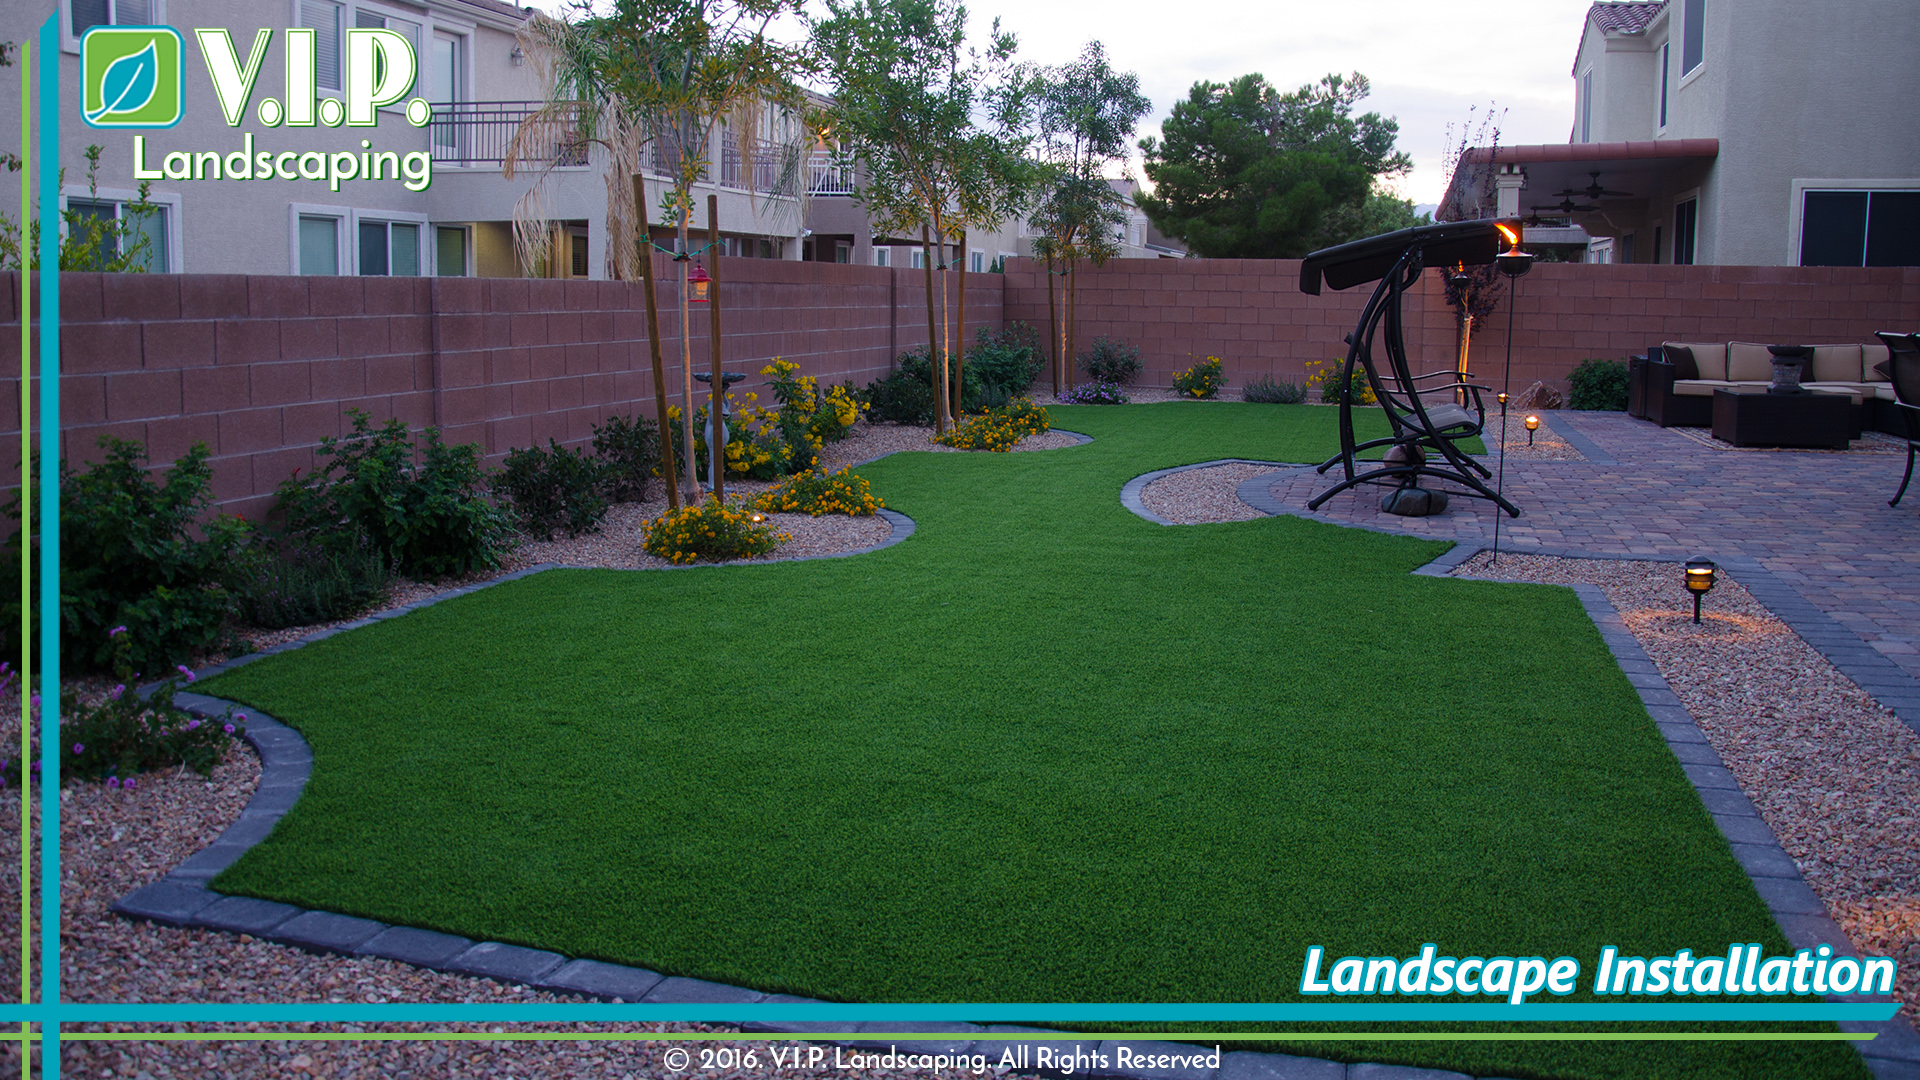 Landscaping Services in Las Vegas